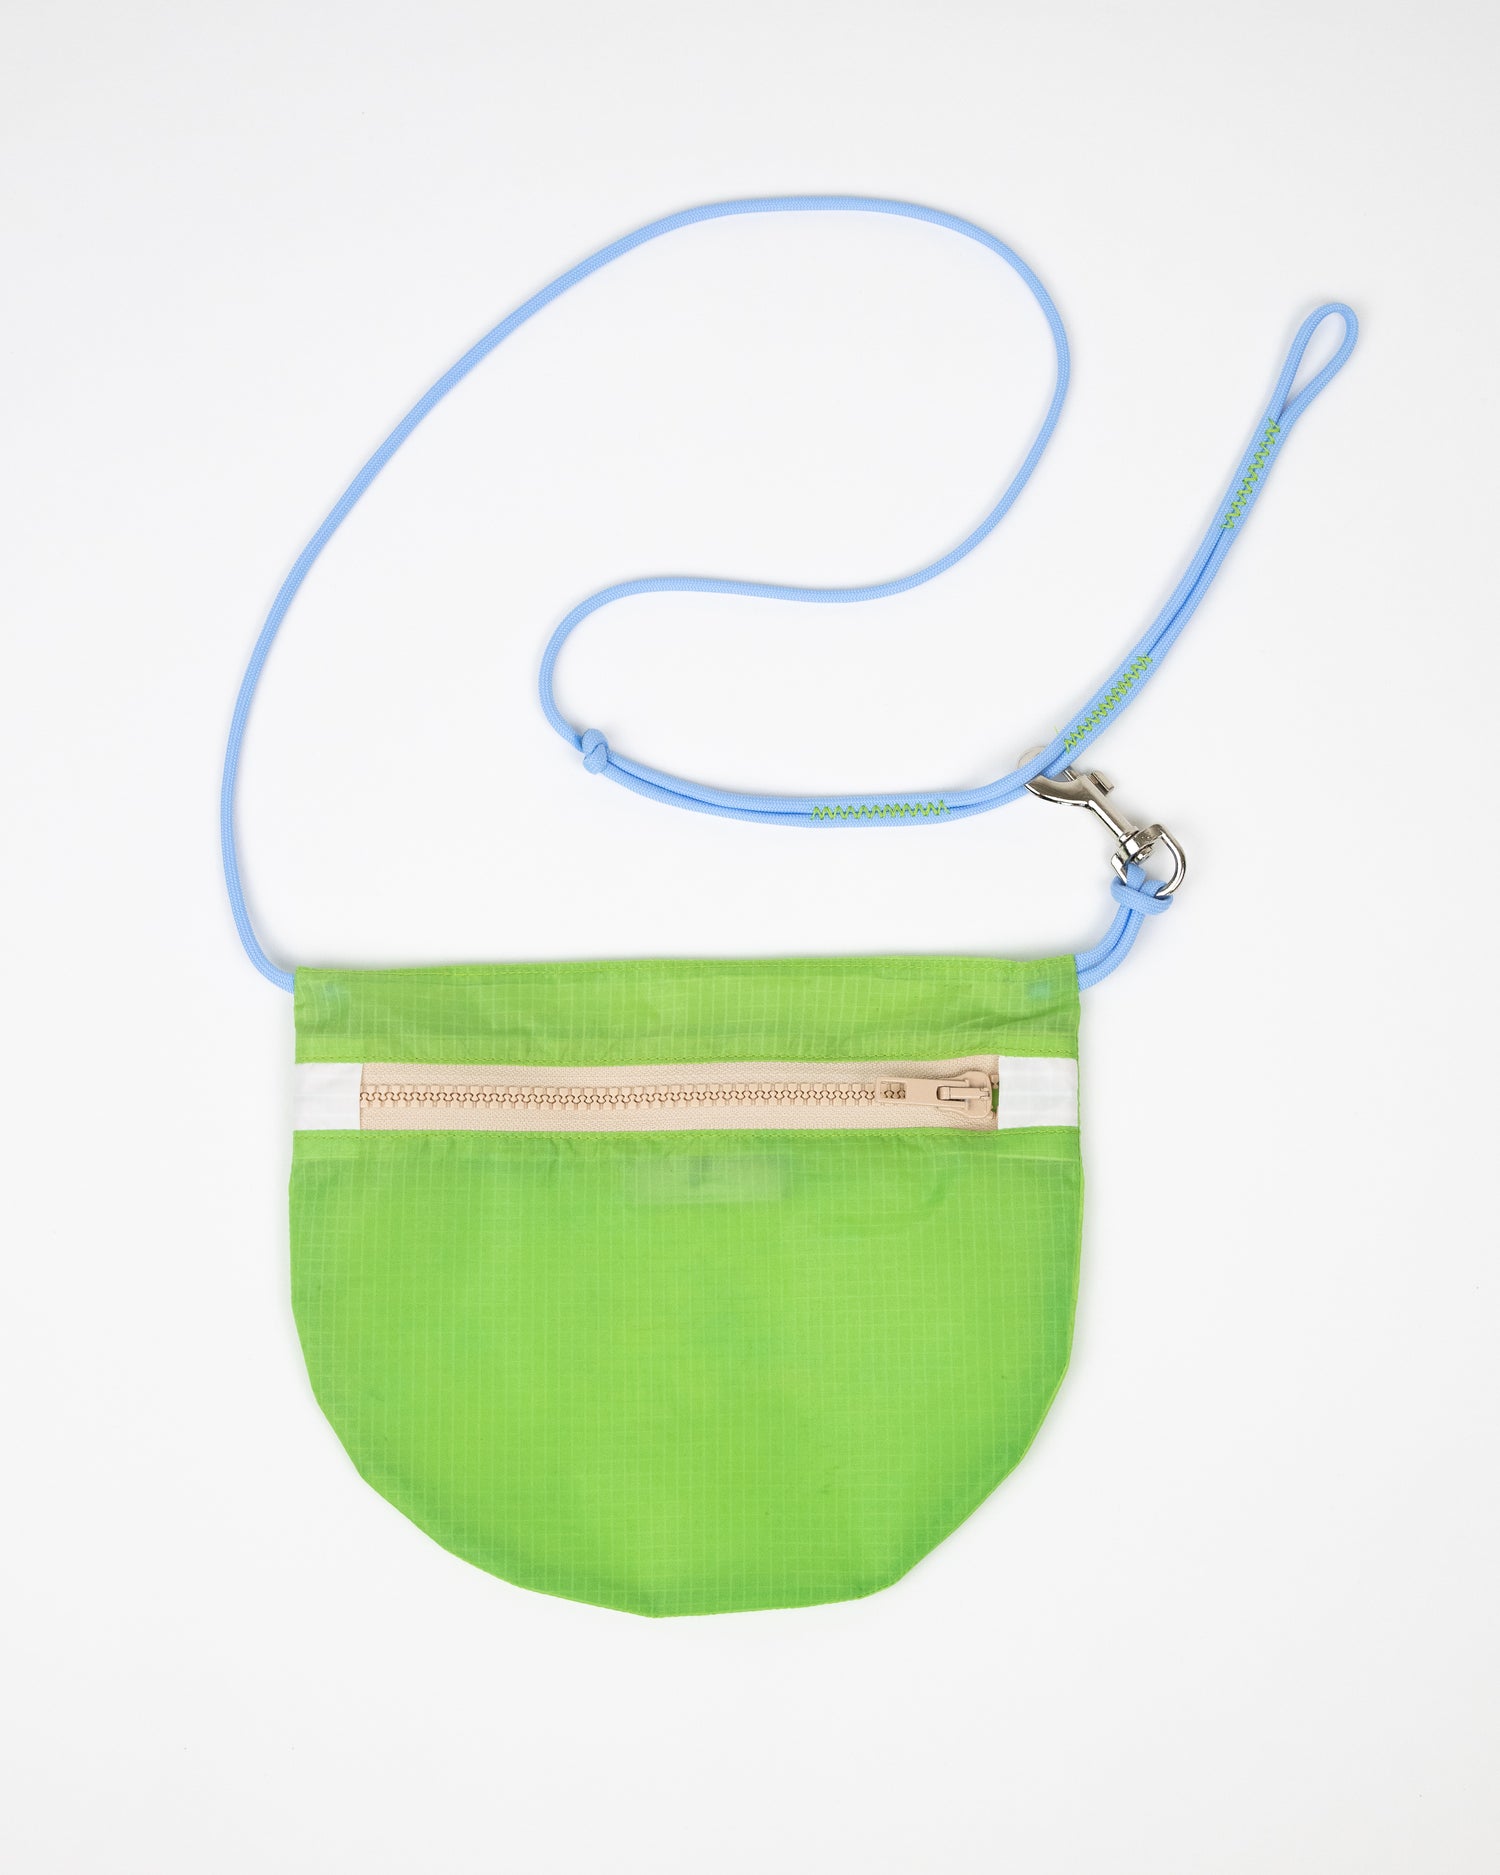 lime green and beige crossbody bag made from vintage paragliders called the U.BAG